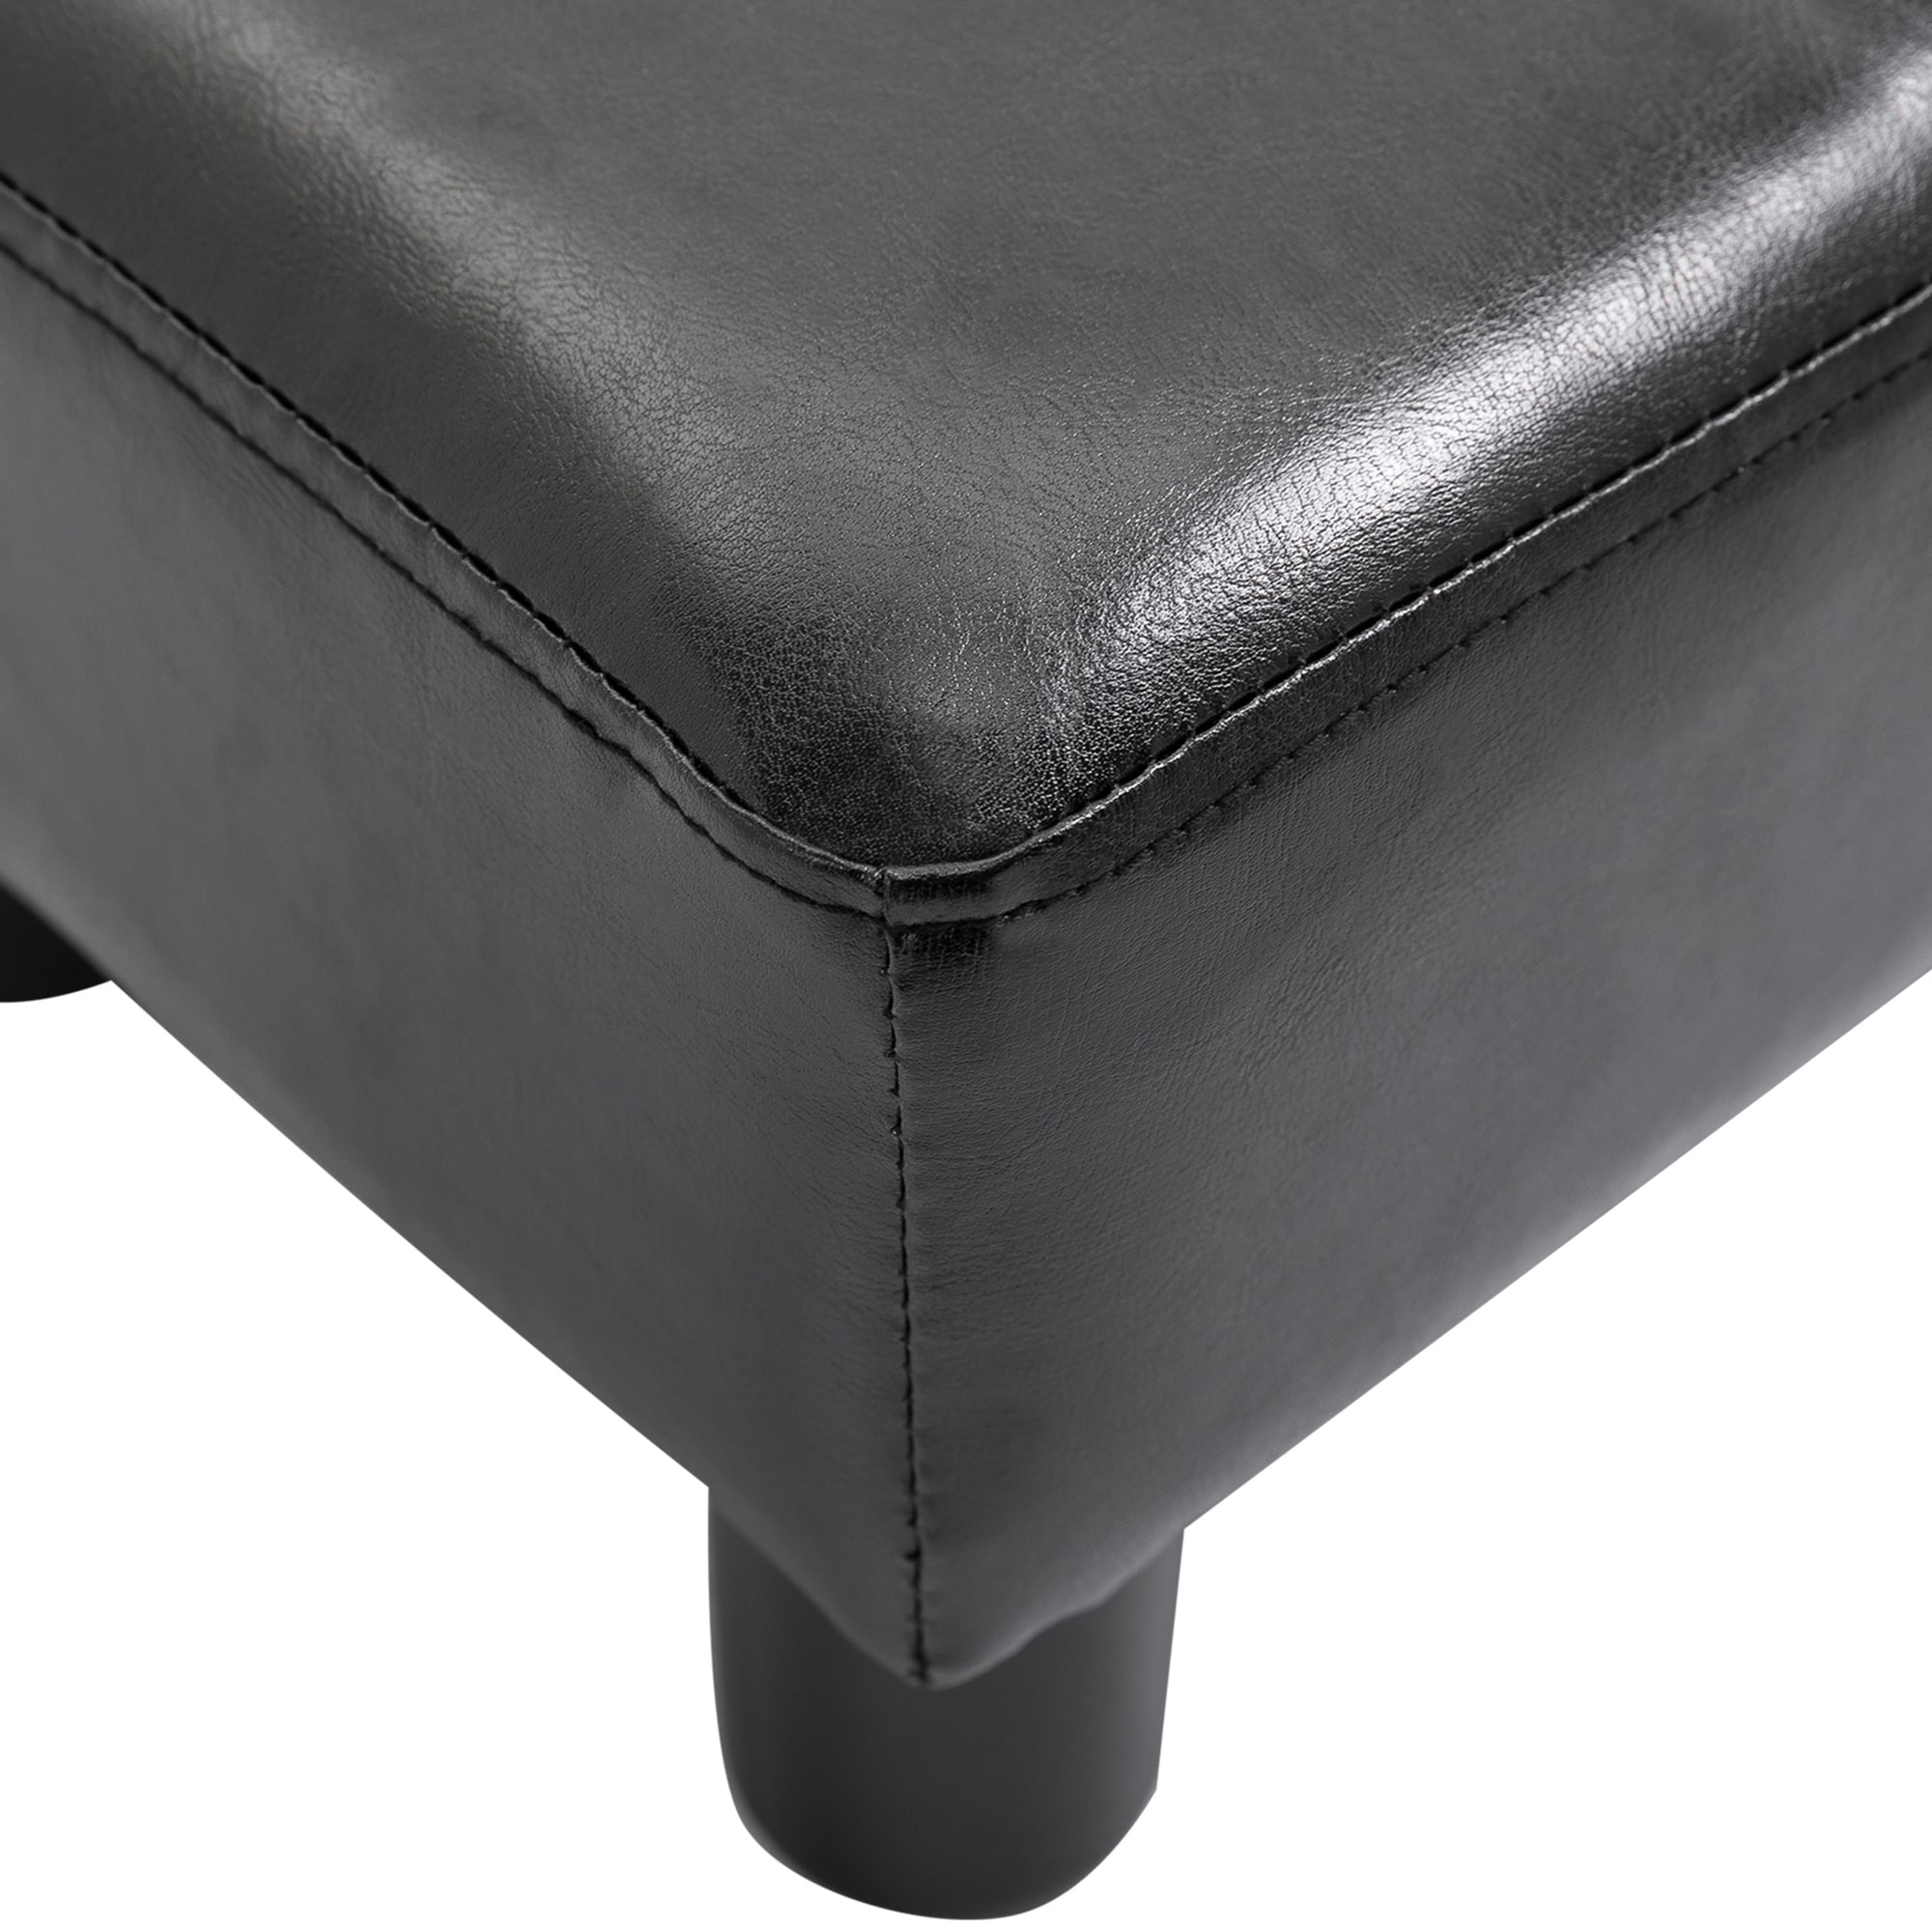 https://ak1.ostkcdn.com/images/products/is/images/direct/719d389b8e39d0f150b55d1e2748df0288cf6786/HOMCOM-Modern-Faux-Leather-Upholstered-Rectangular-Ottoman-Footrest-with-Padded-Foam-Seat-and-Plastic-Legs.jpg